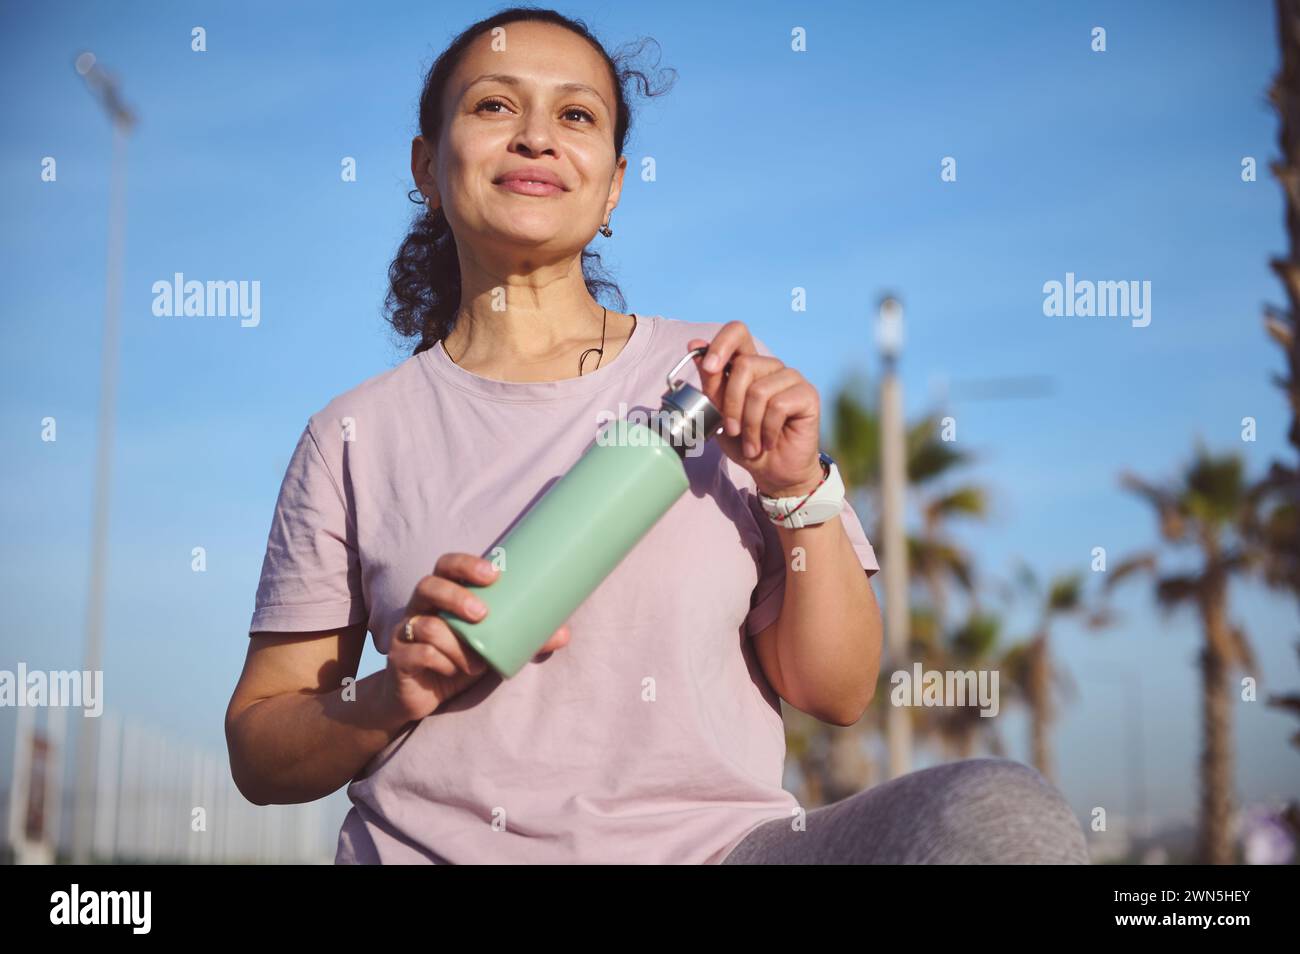 Attractive young sporty female, sportswoman, athlete holding a bottle with water, smiling, looking into distance, standing on the beach, resting after Stock Photo